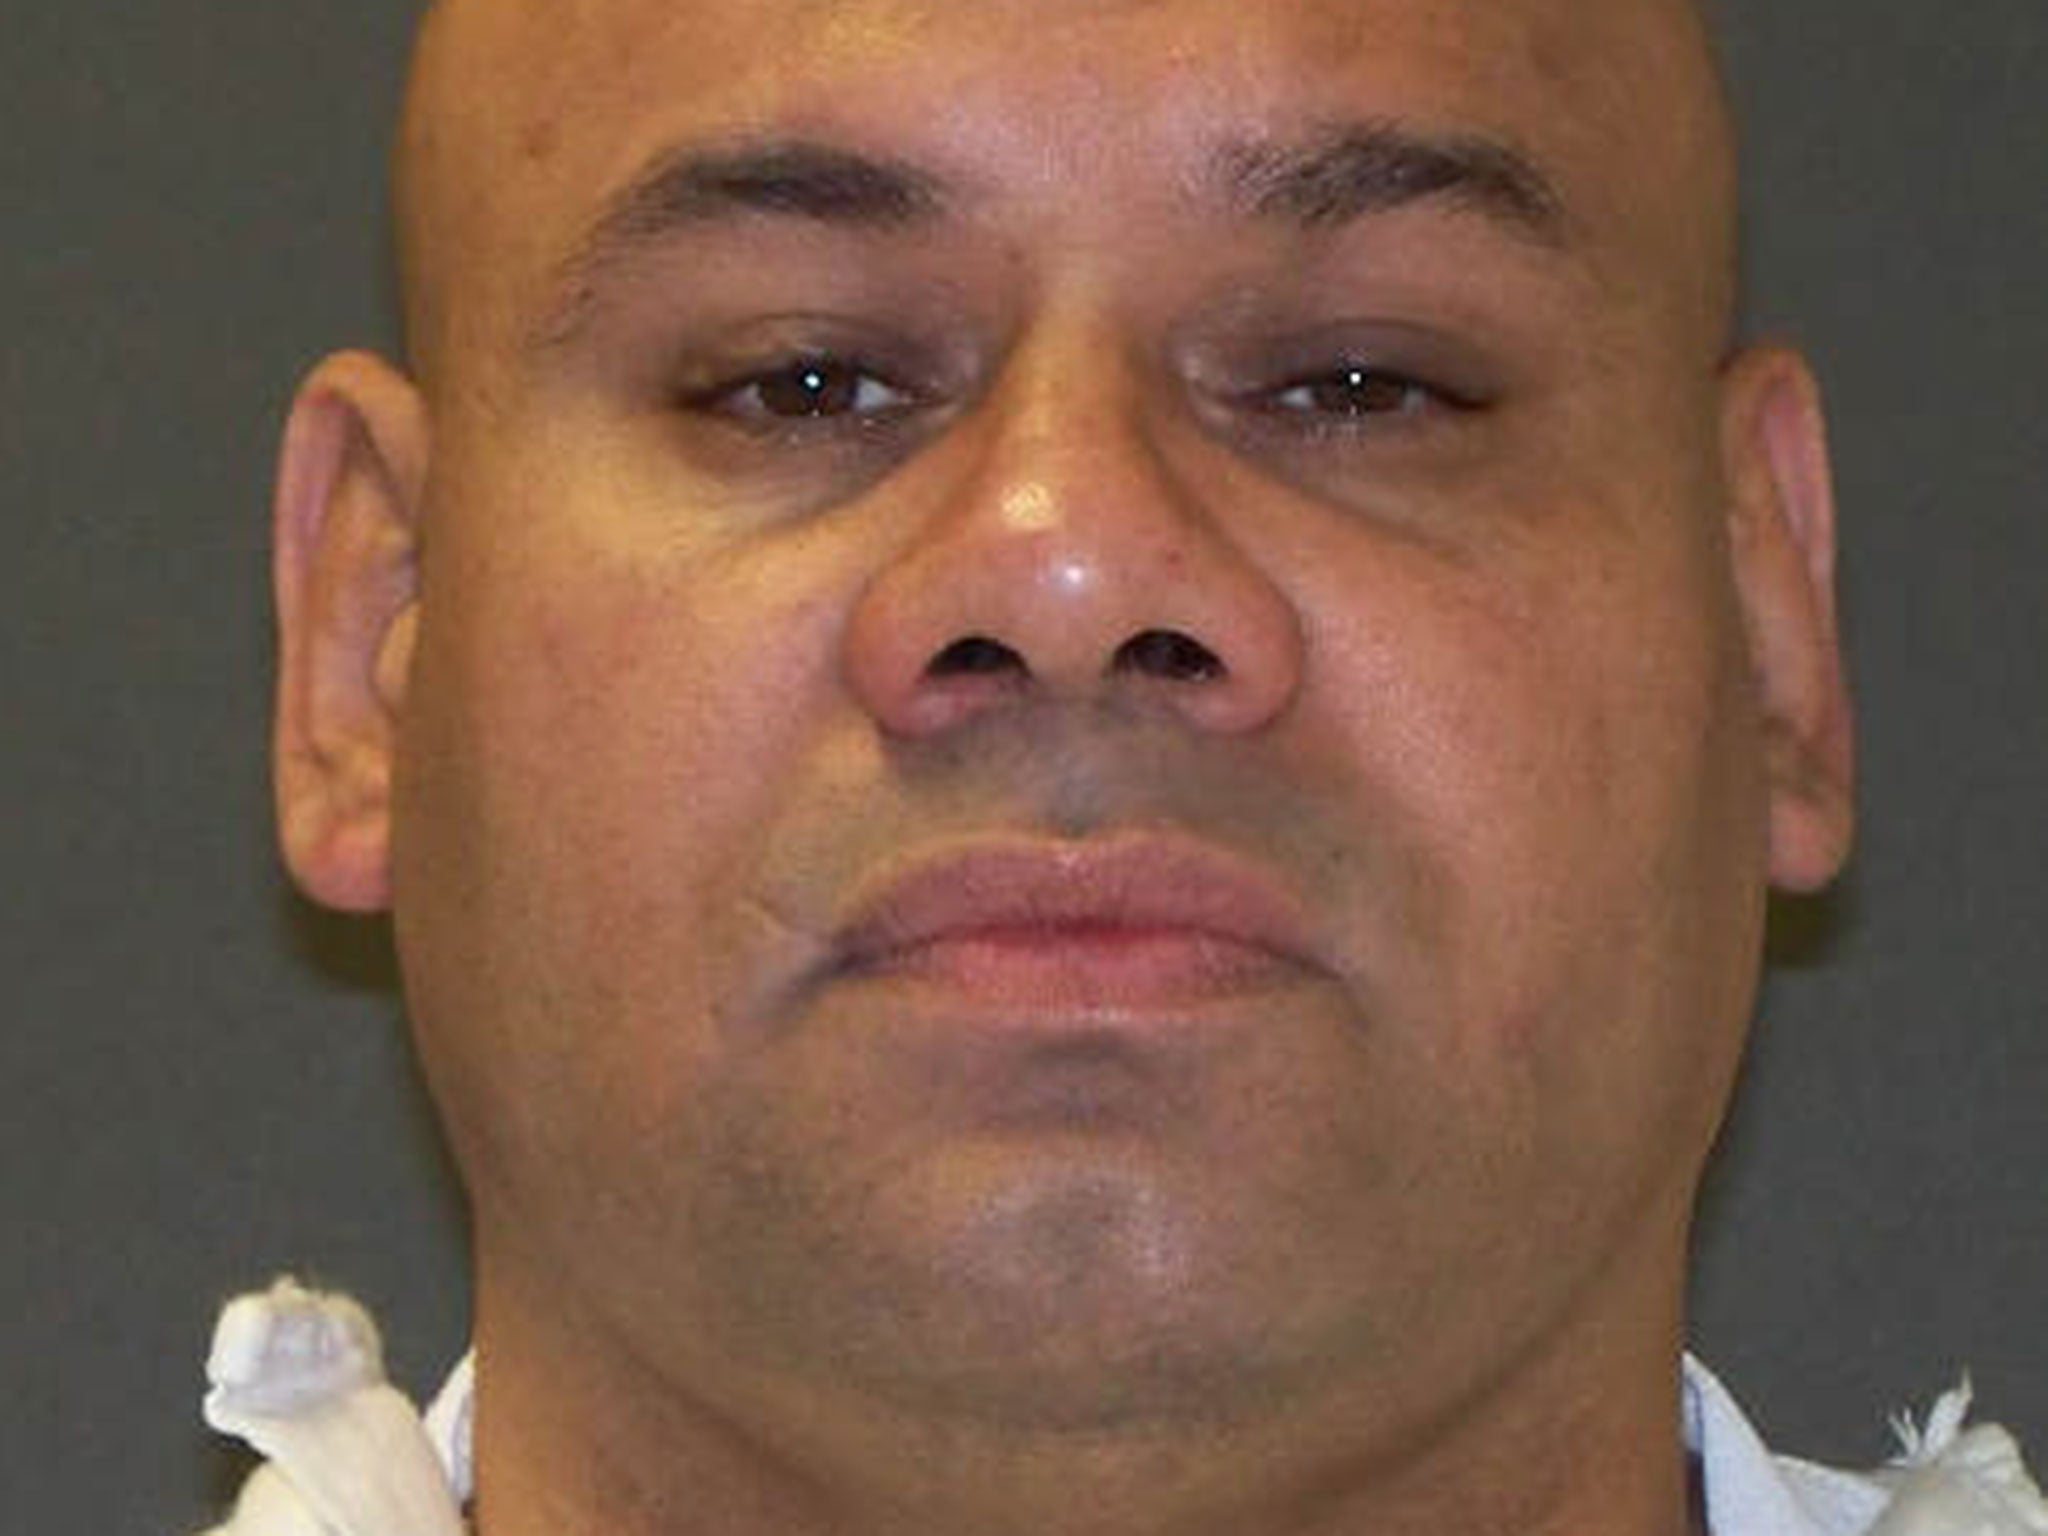 Manuel Vasquez is the fourth Texas inmate to be put to death this year